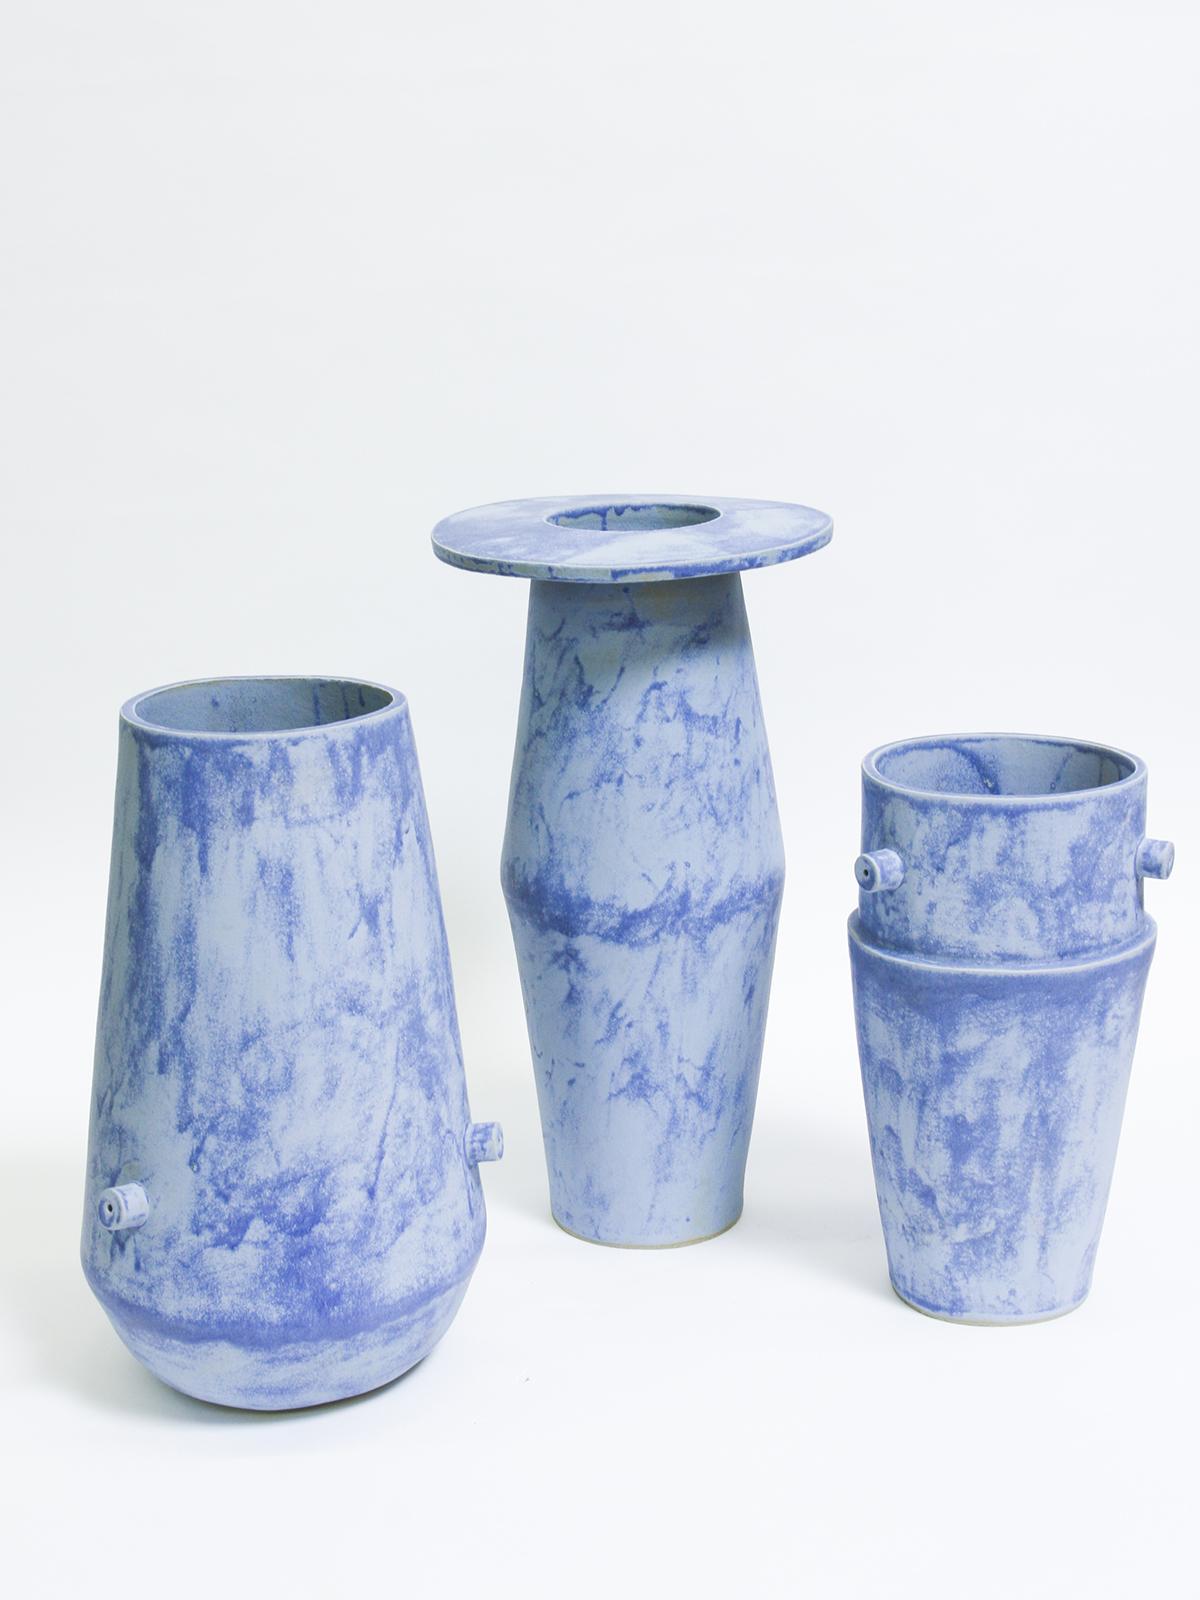 Giant tall saucer ceramic vase in matte blue. Made to order.

BZIPPY clay goods are one-of-a-kind stoneware / earthenware editions with variations in glazes depending on the high fire process. Please note that works are unique and not exactly the